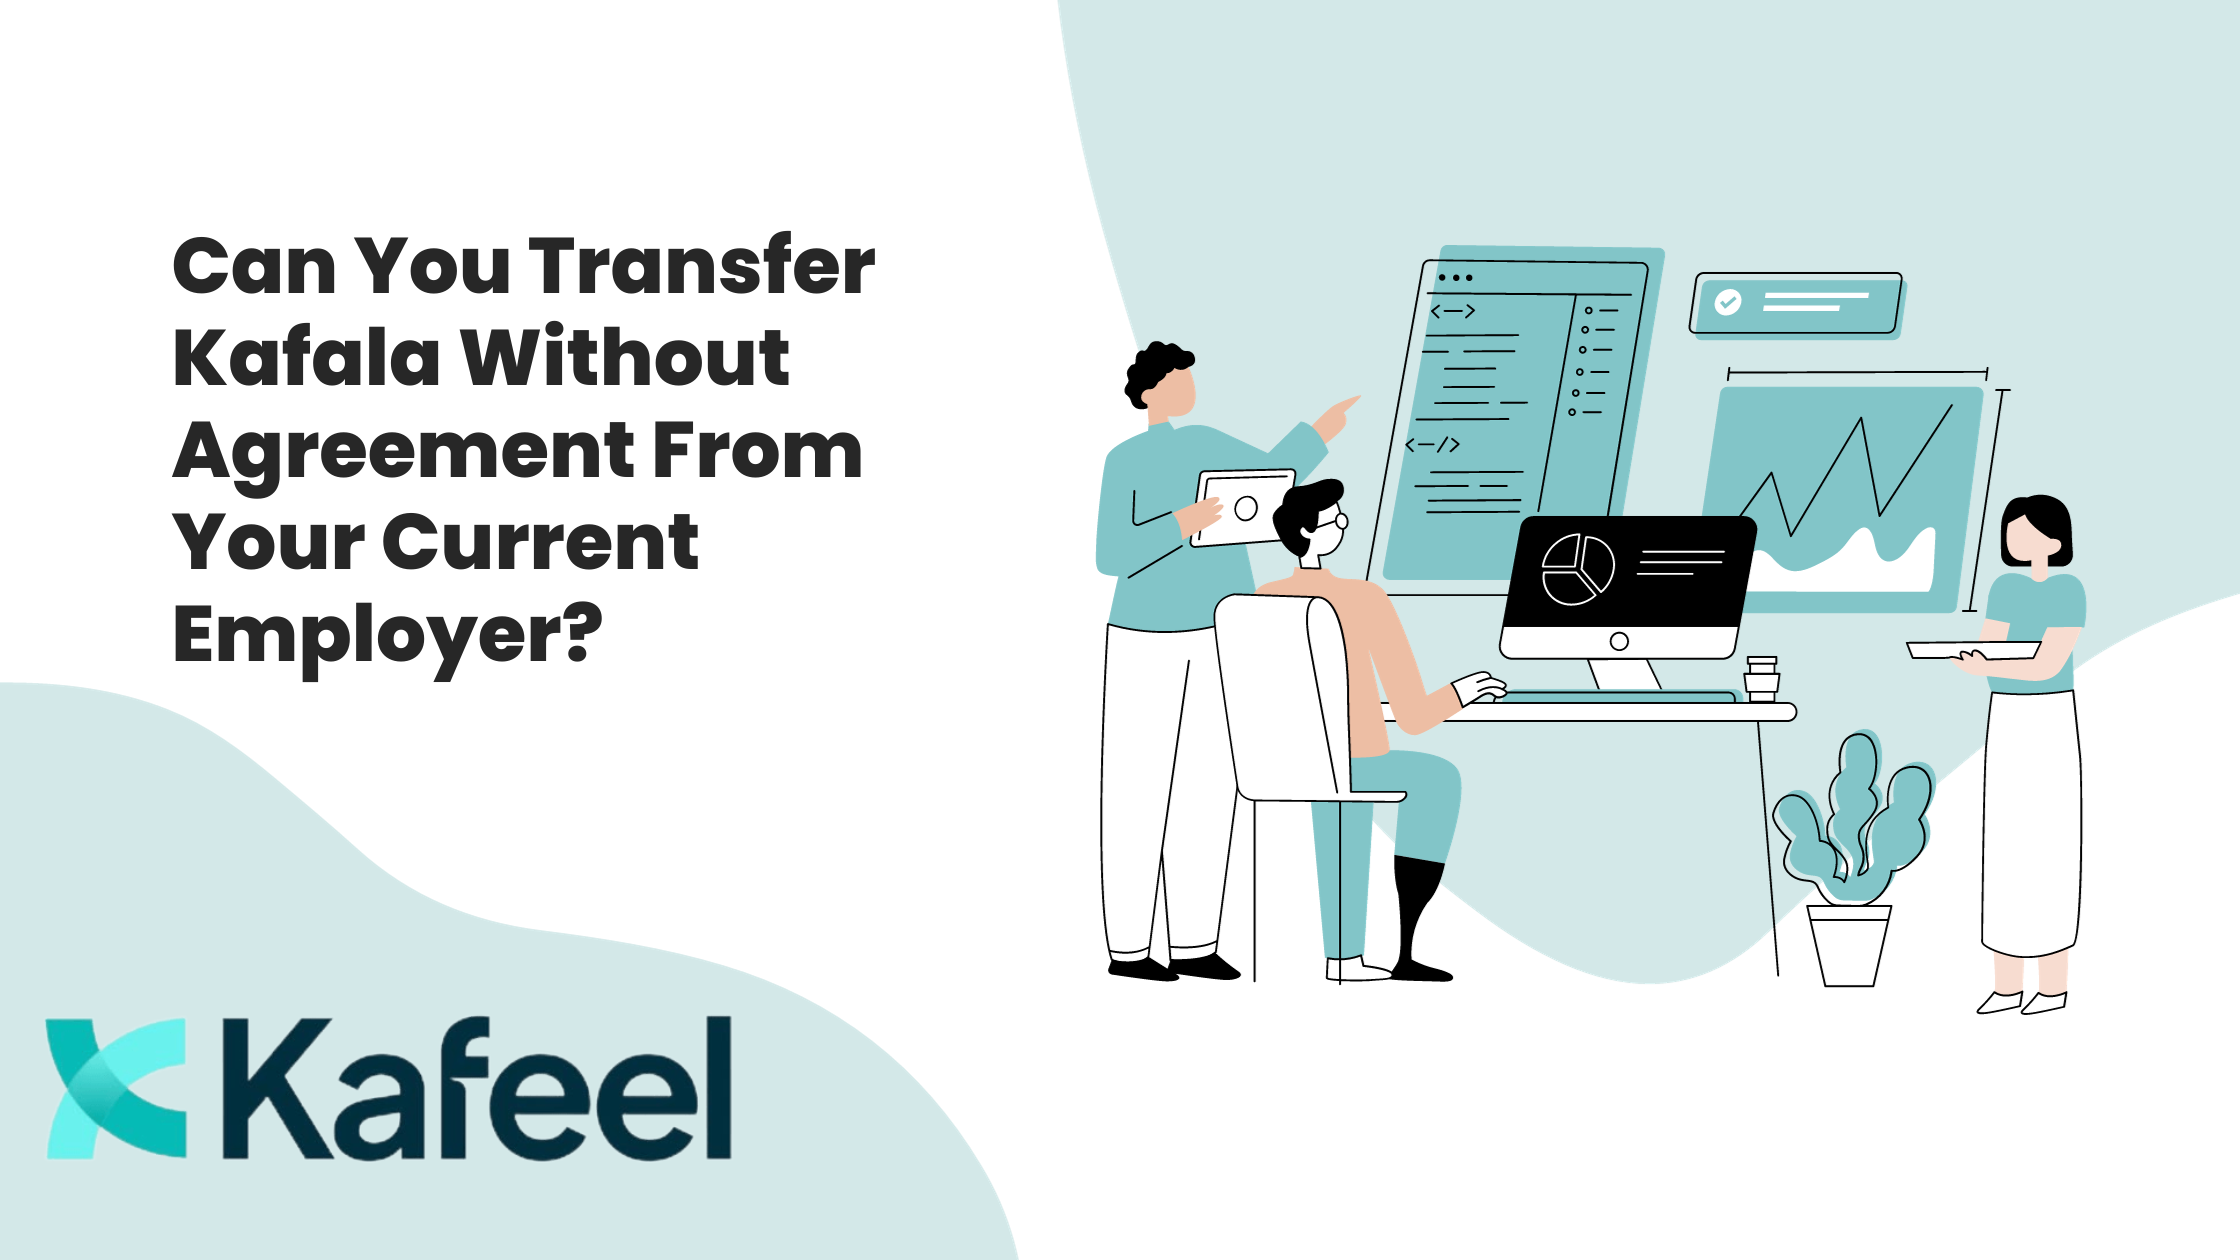 Can You Transfer Kafala Without Agreement From Your Current Employer?